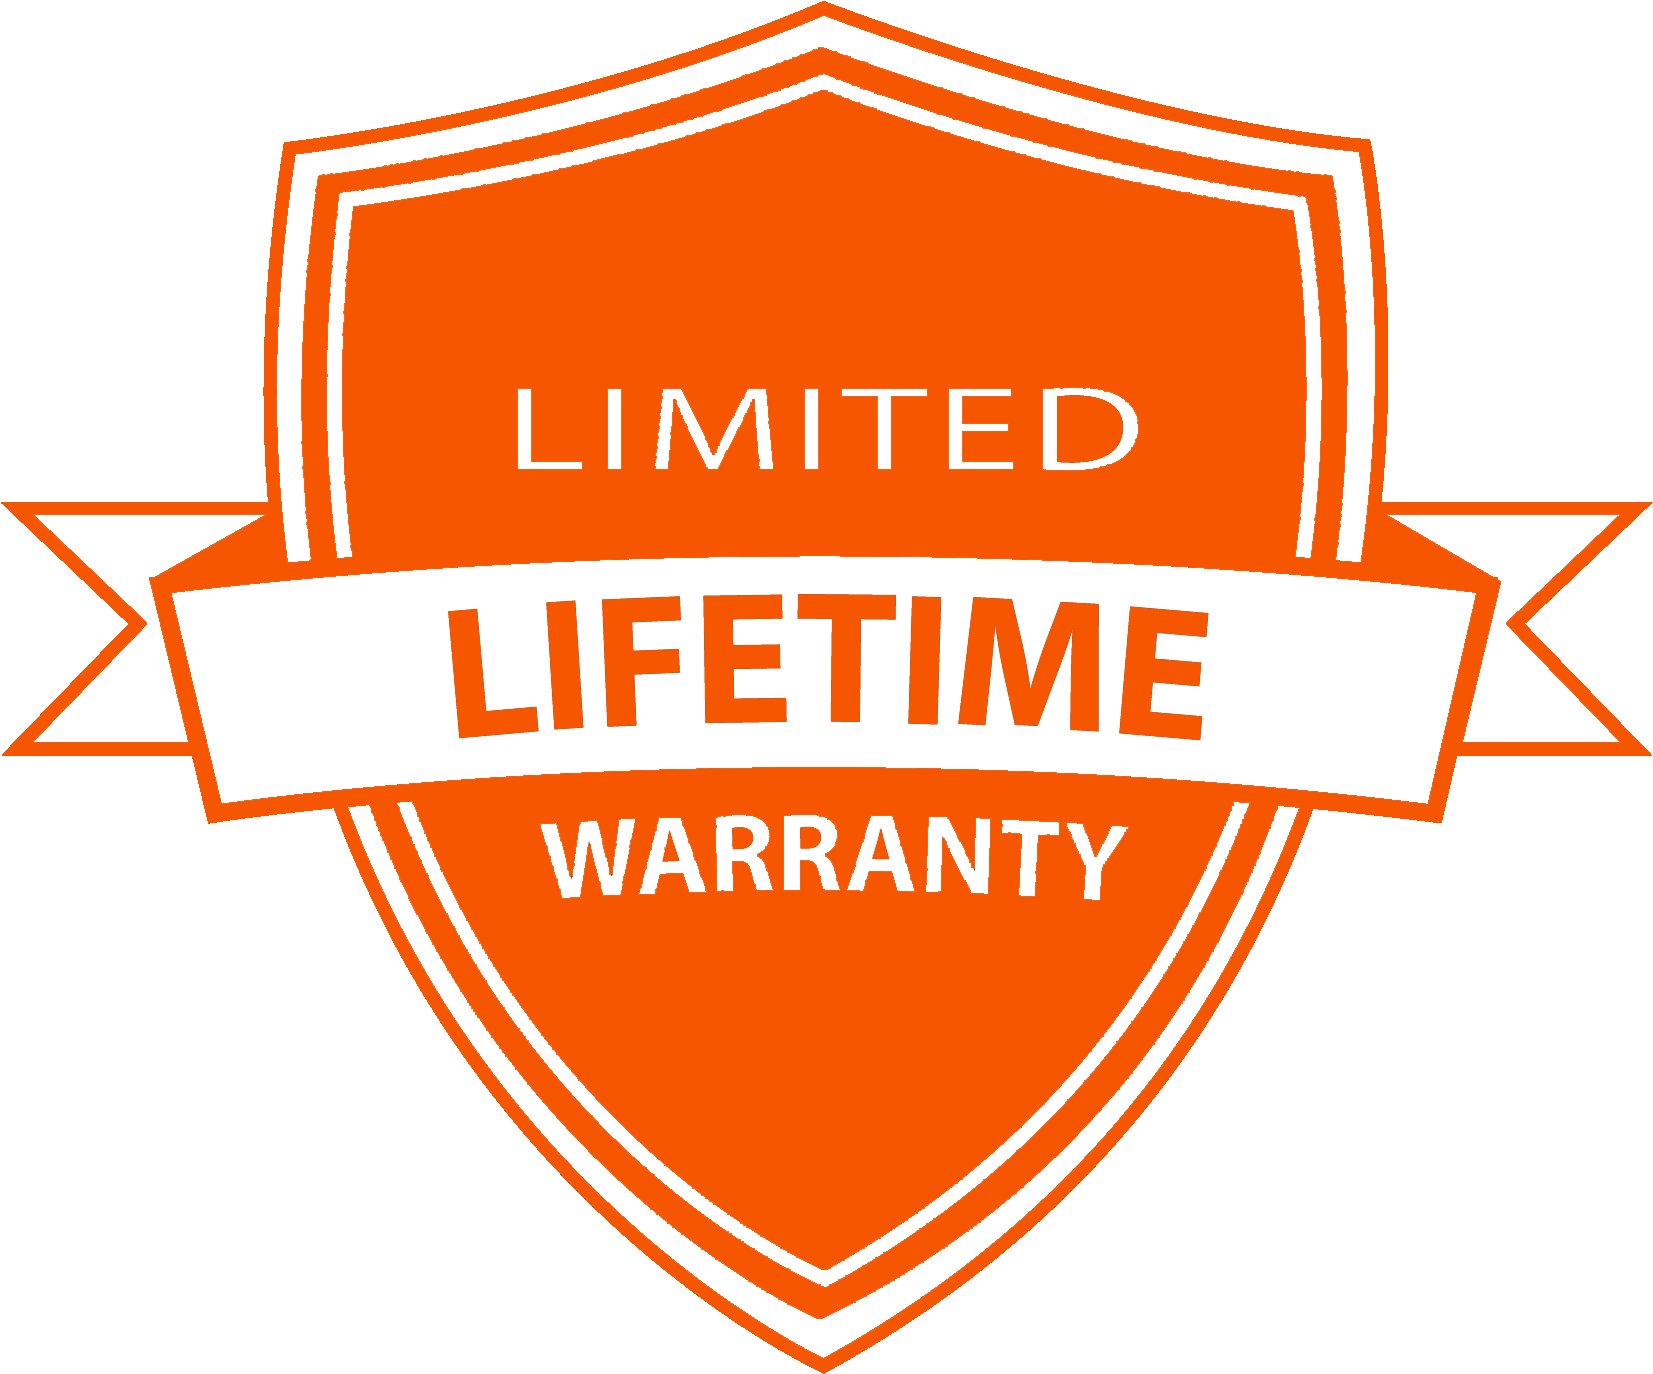 Limited lifetime warranty on all our work